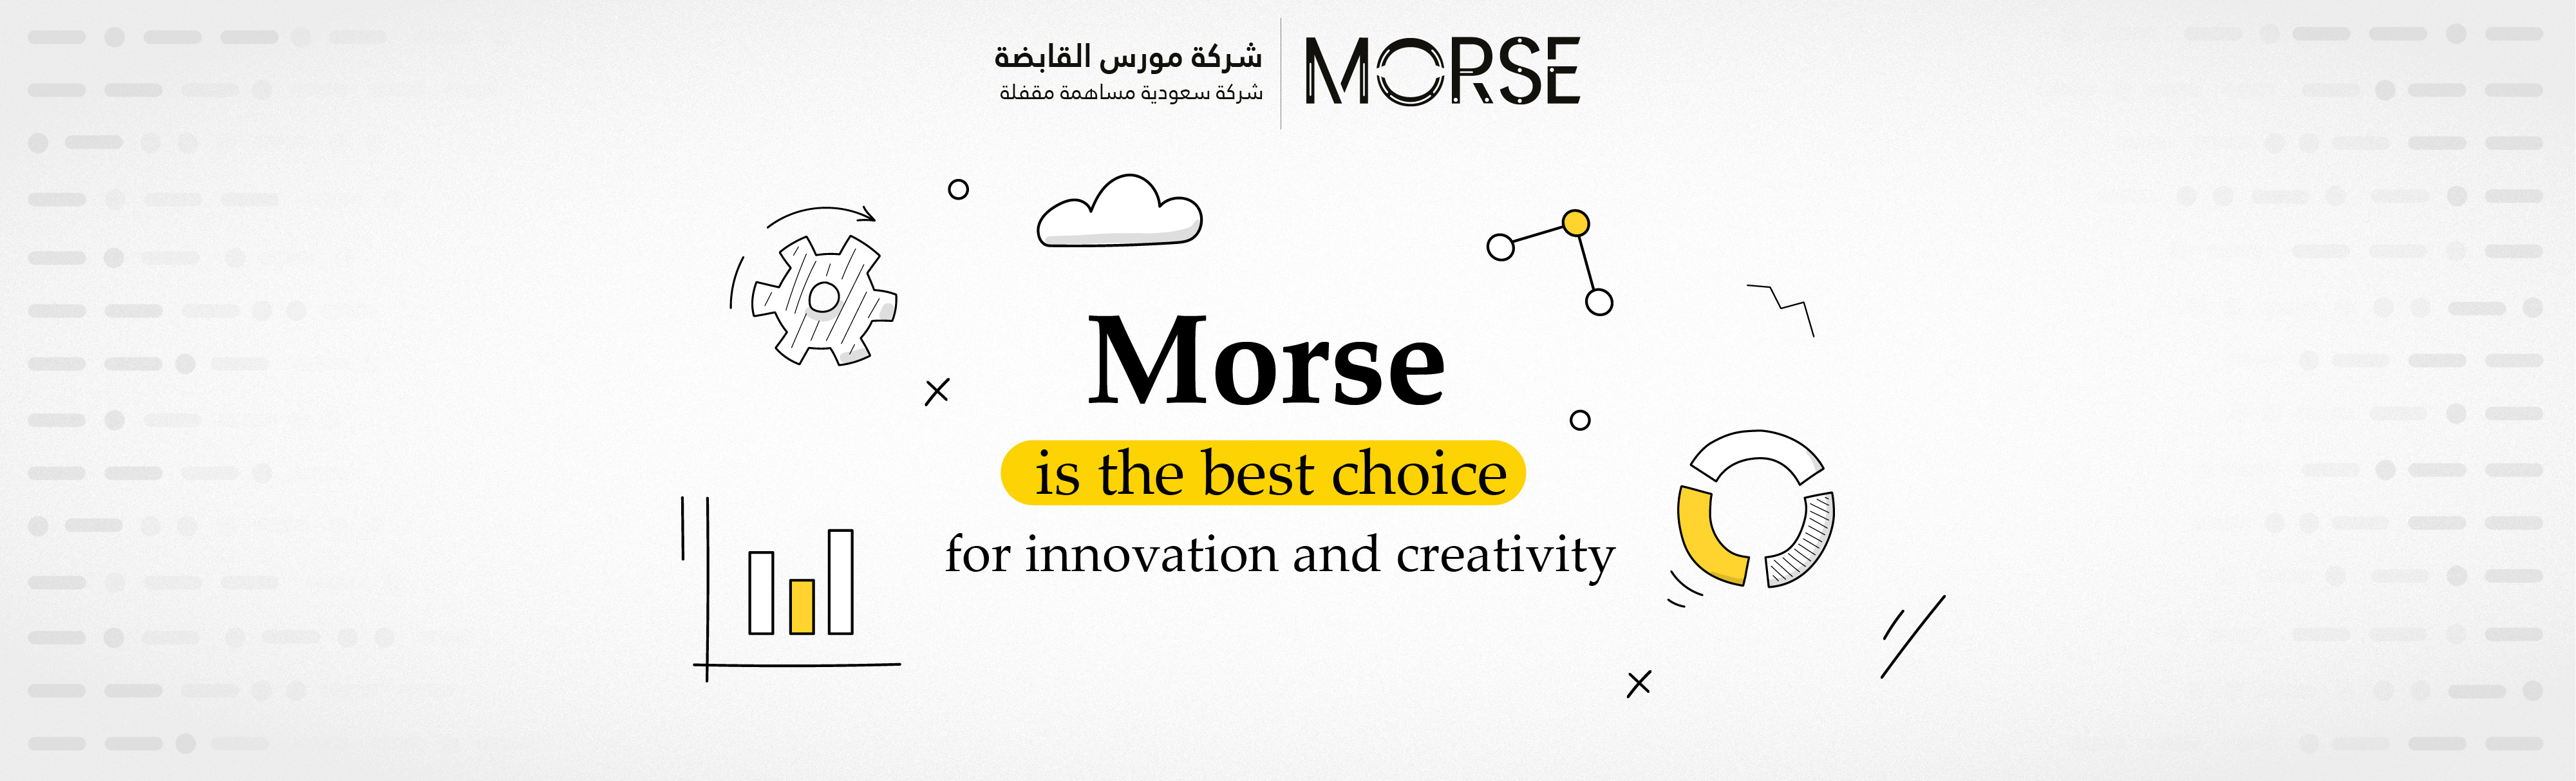 Morse is the best choice for creativity and innovation